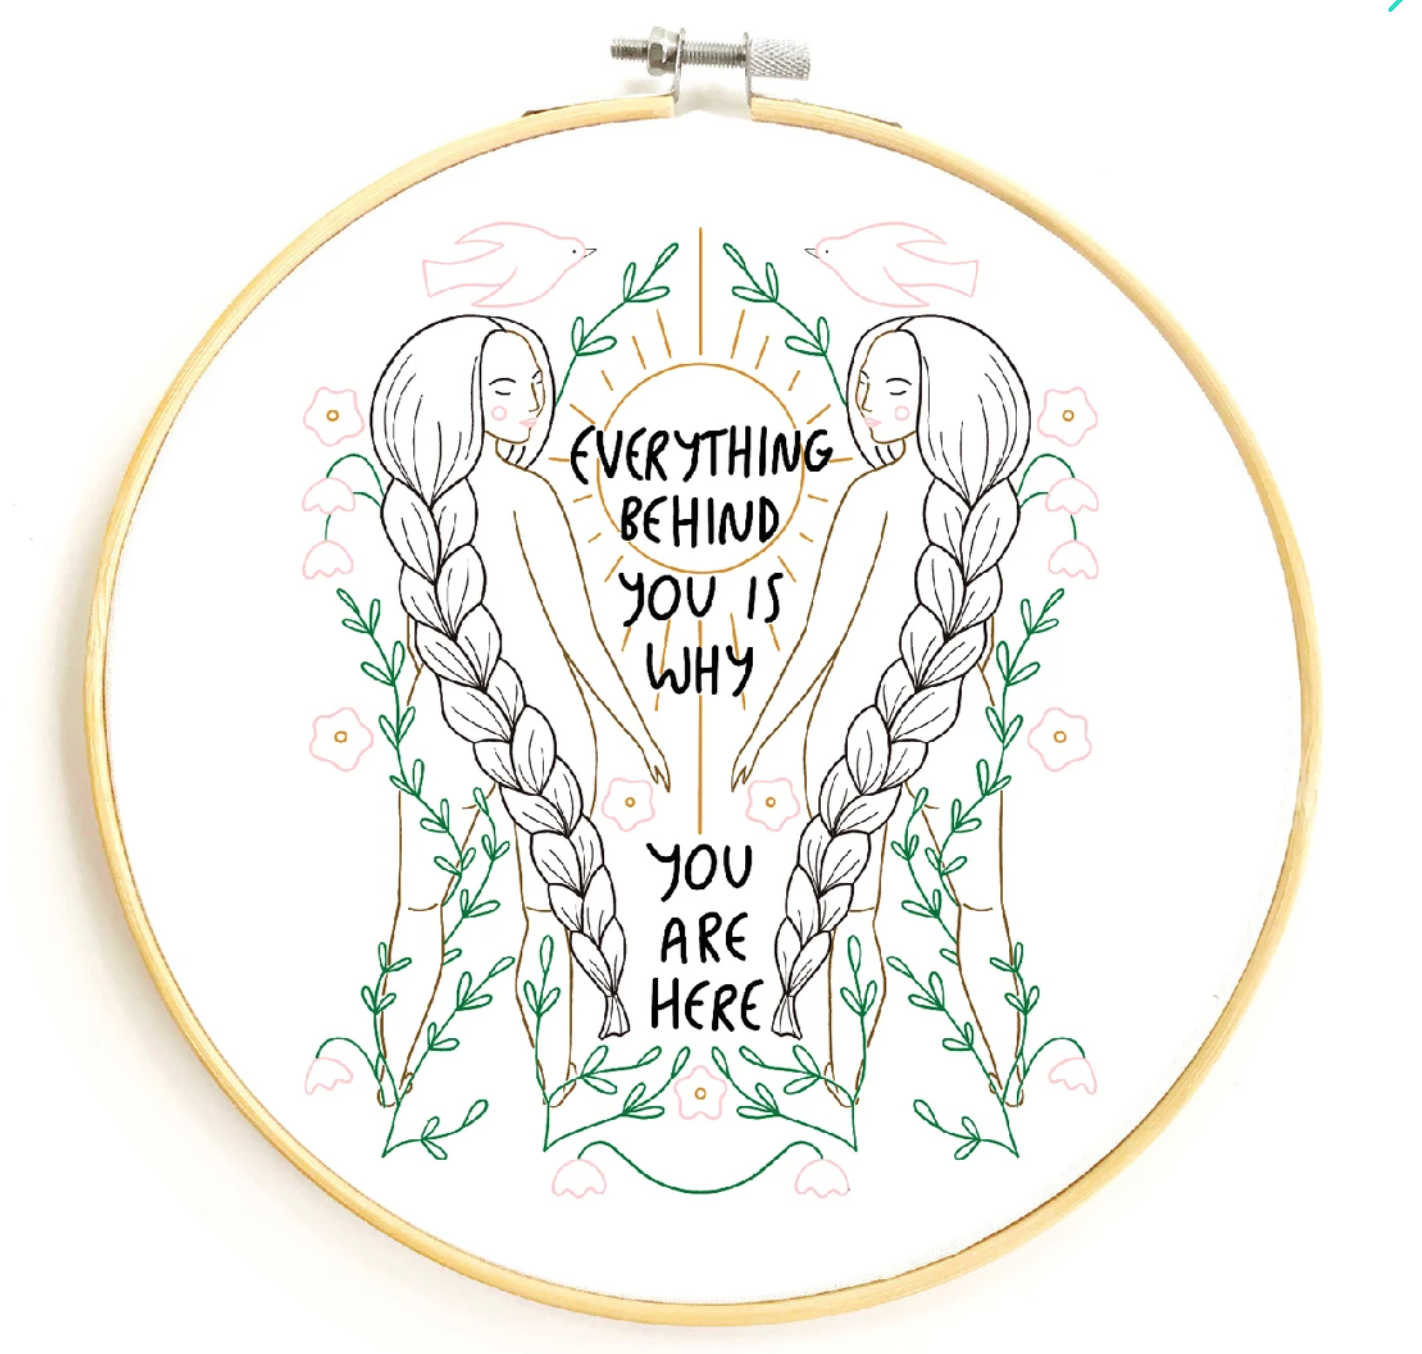 Embroidery Kit - Everything Behind You